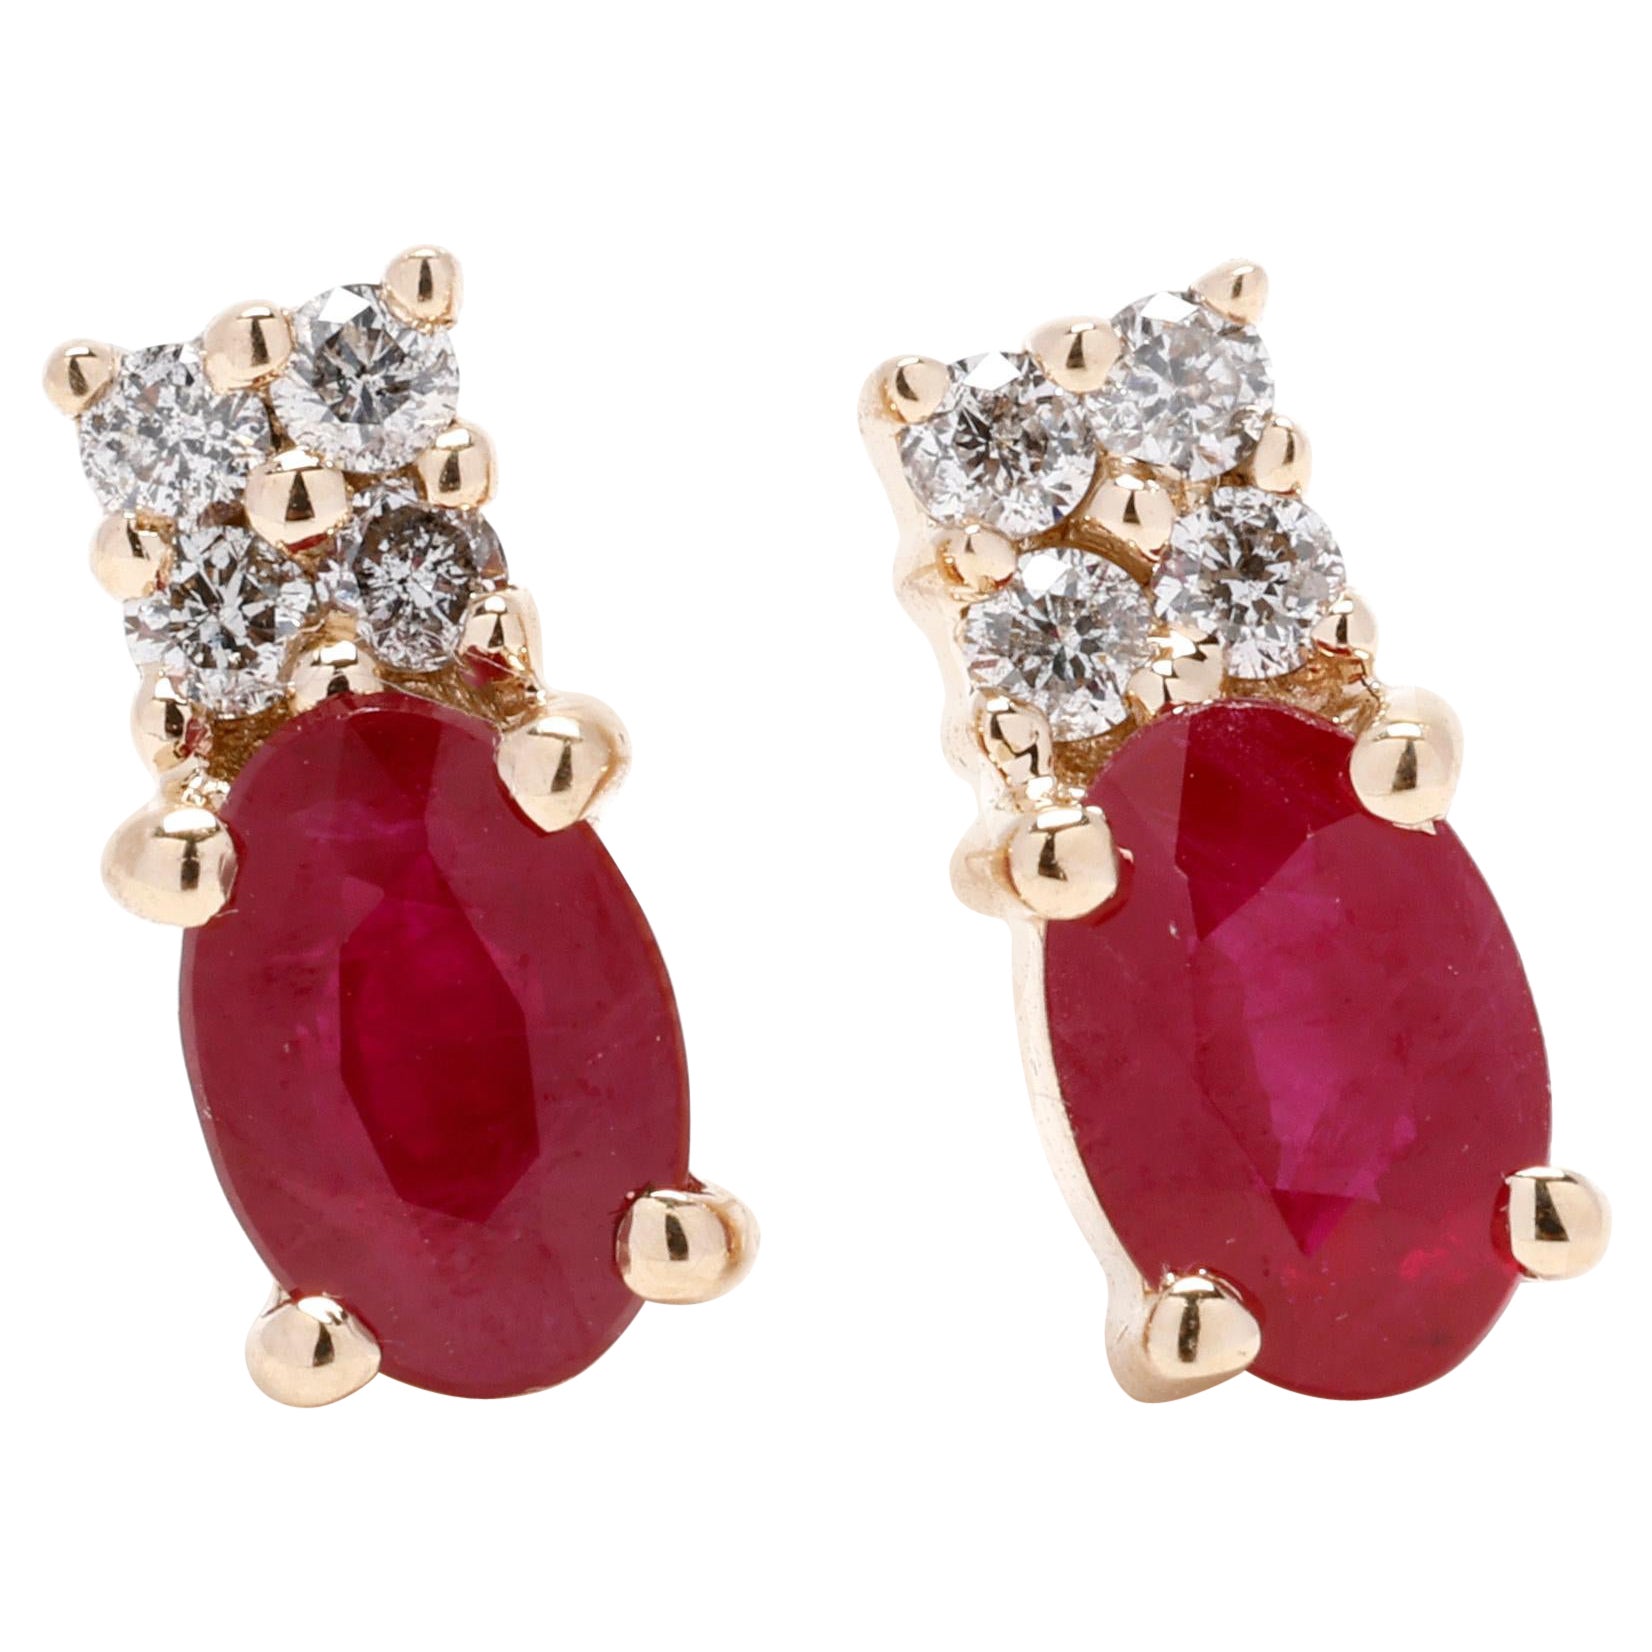 1.32ctw Diamond and Ruby Stud Earrings, 14k Yellow Gold, Small Red Ruby Earrings For Sale